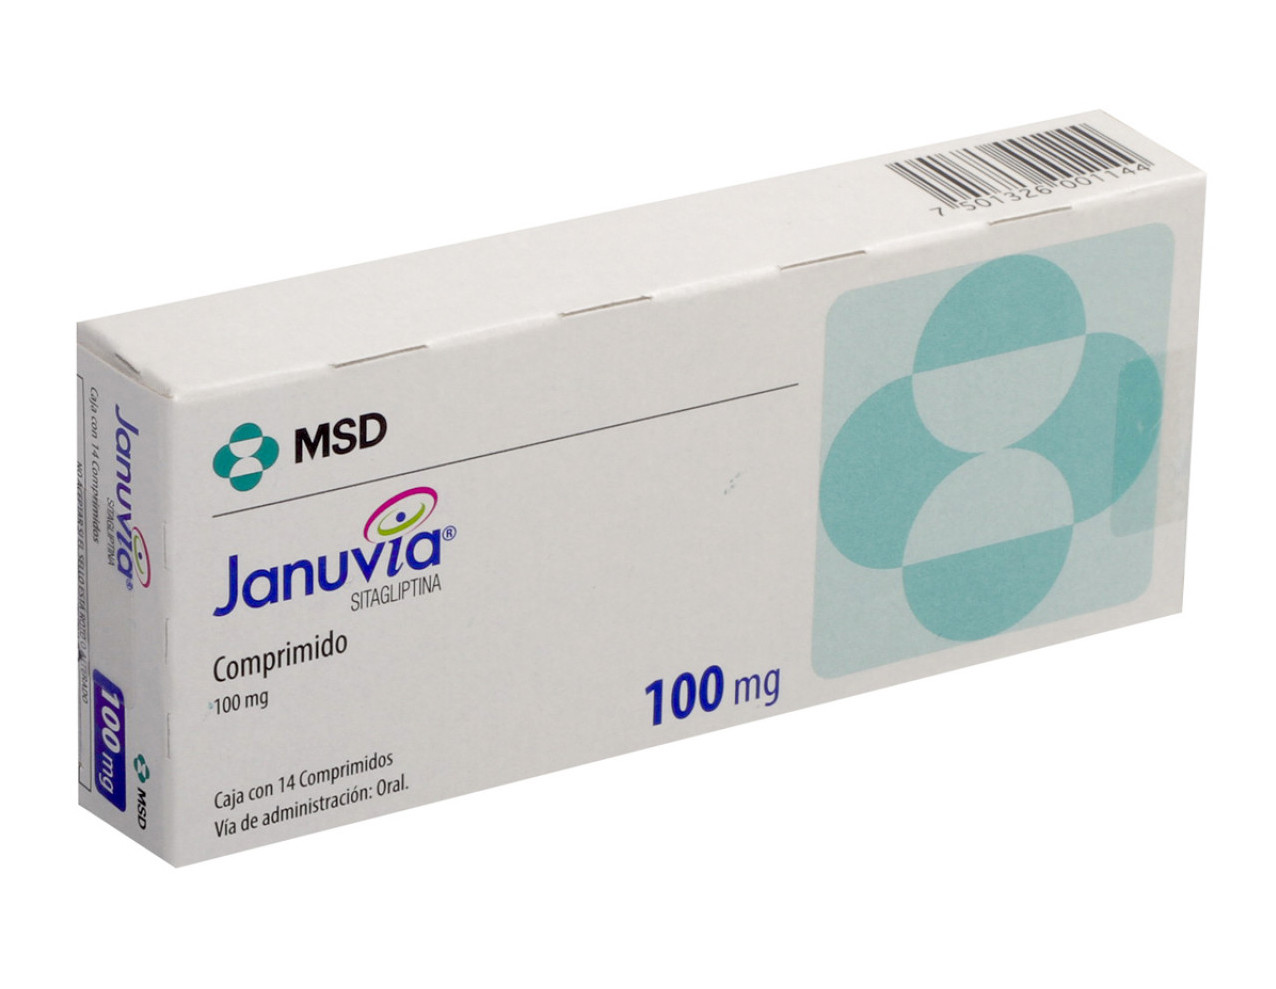 is januvia bad for your health